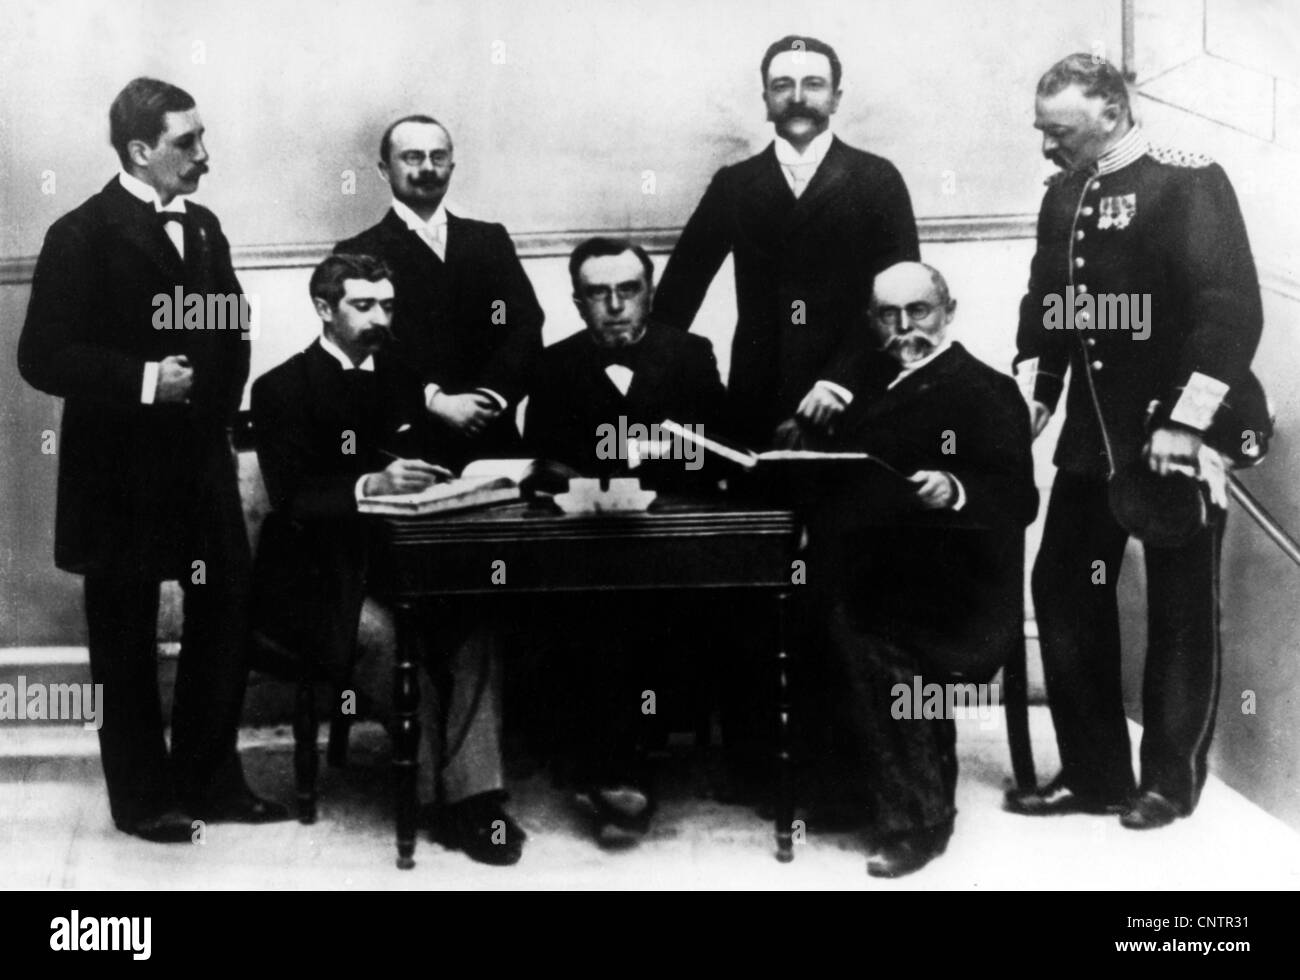 sport, Olympic Games, officials of the 1st Olympic Committee, standing from left: Willibald Gebhardt, Jiri Guth-Jarkovsky, Ferenc Kemeny, Viktor Balck, sitting from left: Baron Pierre de Coubertin, Demetrius Vikelas, Alexey Butovsky, Athens, 1896, Additional-Rights-Clearences-Not Available Stock Photo